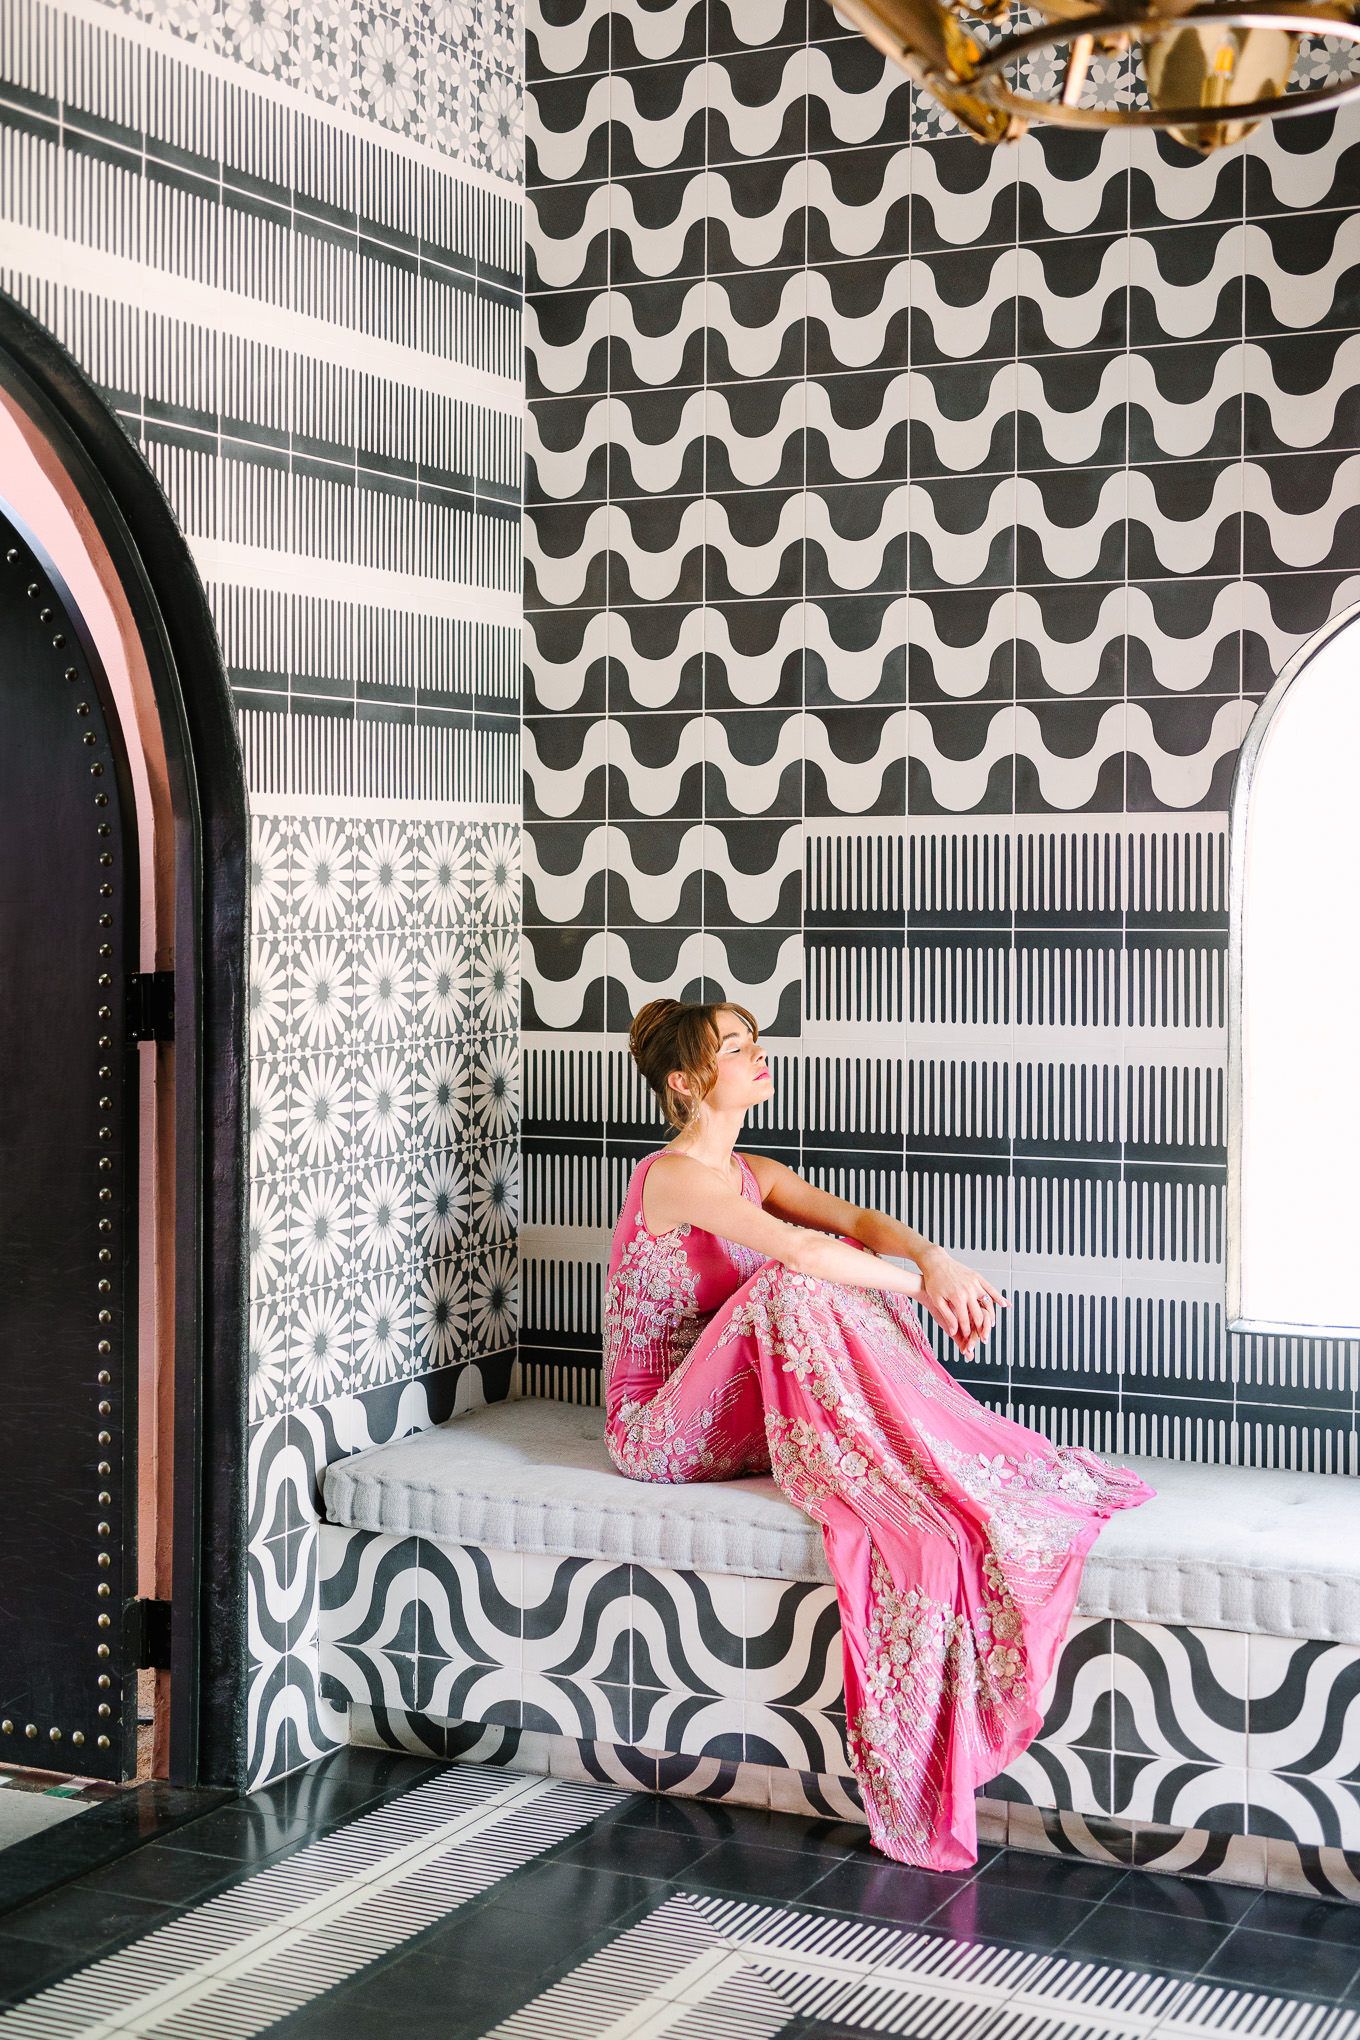 Beaded pink Naeem Khan gown in Sands Hotel tiled lobby | Kindred Presets x Mary Costa Photography Sands Hotel Ad Campaign | Colorful Palm Springs wedding photography | #palmspringsphotographer #lightroompresets #sandshotel #pinkhotel   Source: Mary Costa Photography | Los Angeles